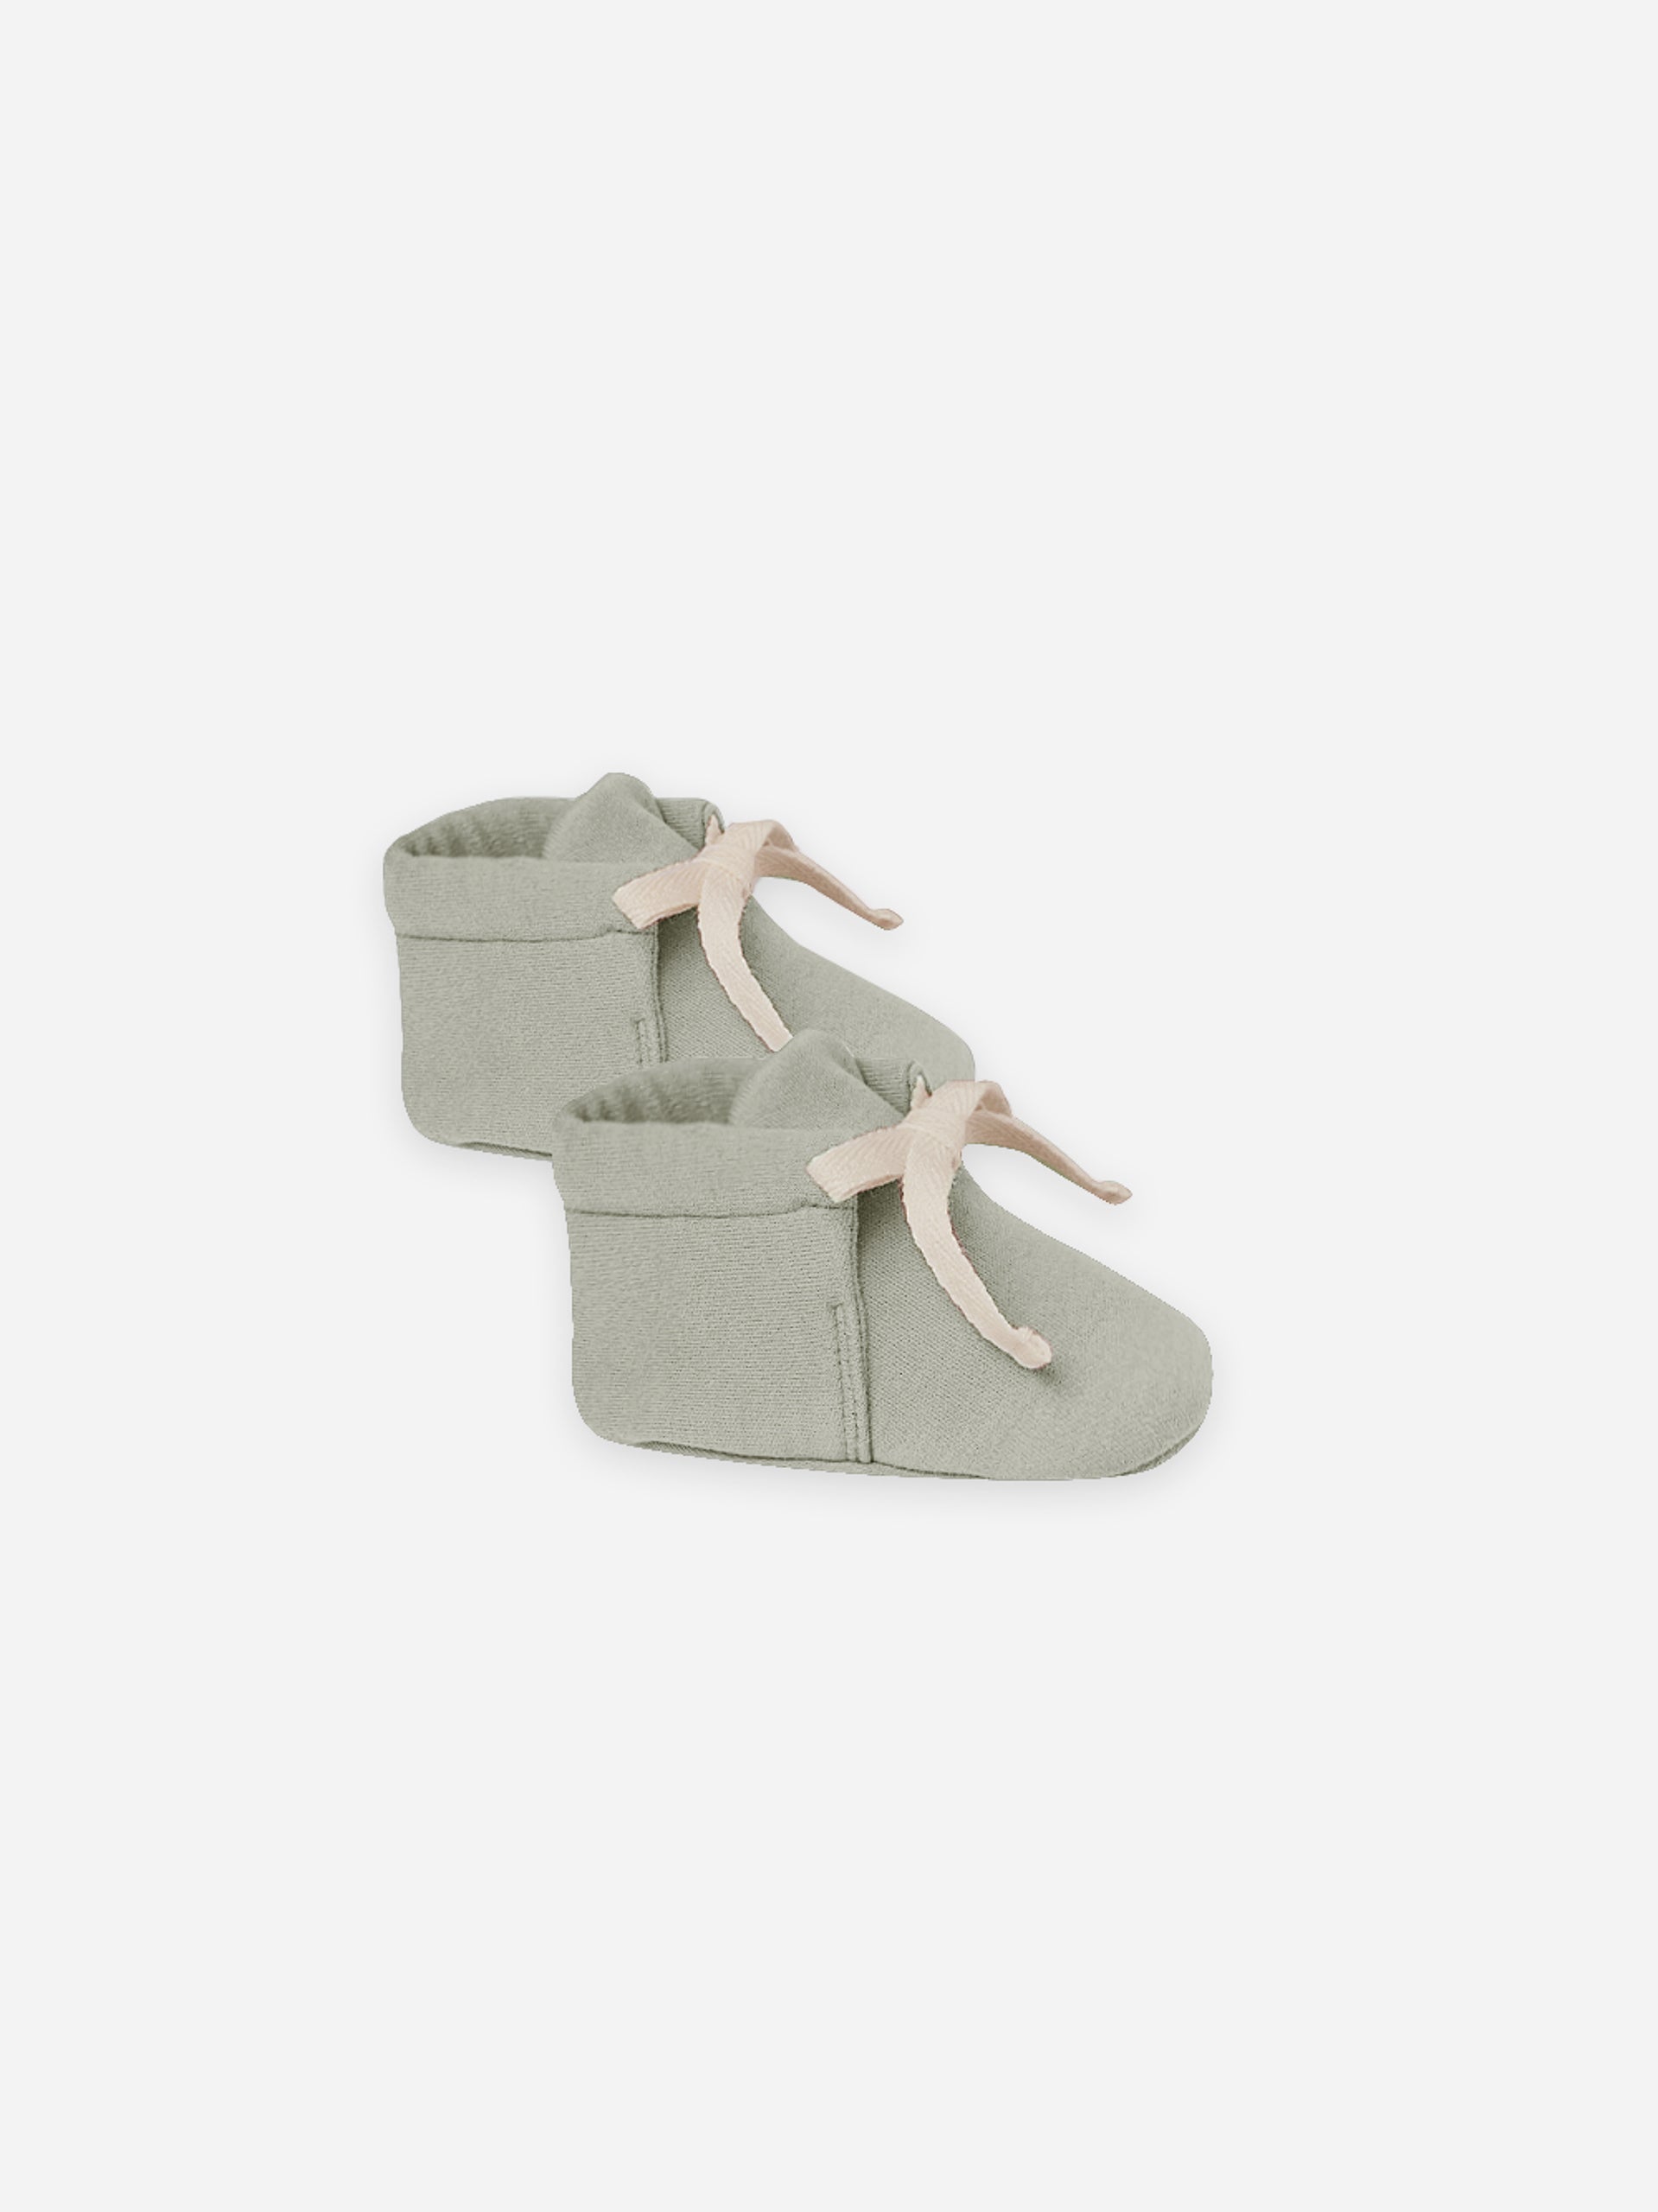 baby booties | pistachio - Quincy Mae | Baby Basics | Baby Clothing | Organic Baby Clothes | Modern Baby Boy Clothes |